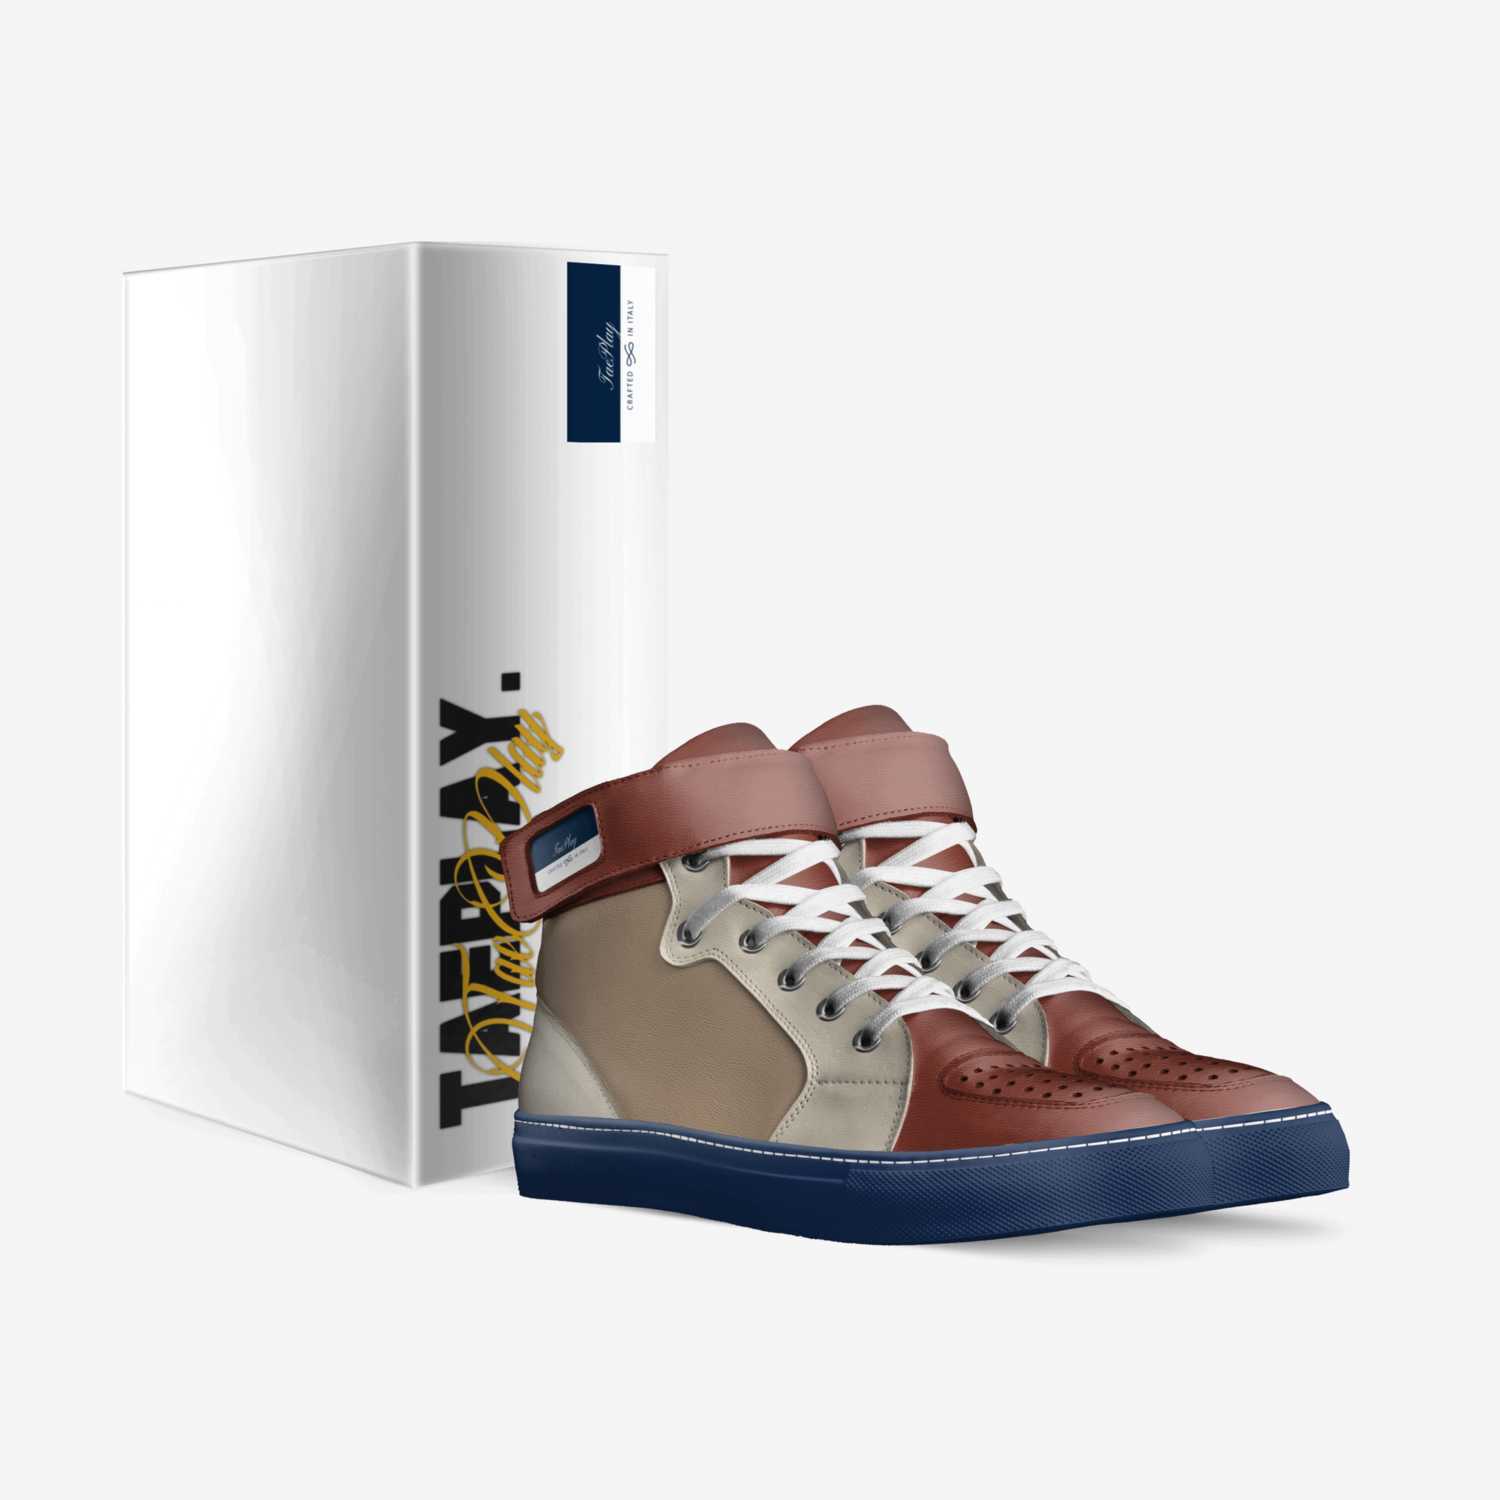 TaePlay custom made in Italy shoes by Thavory Huon | Box view